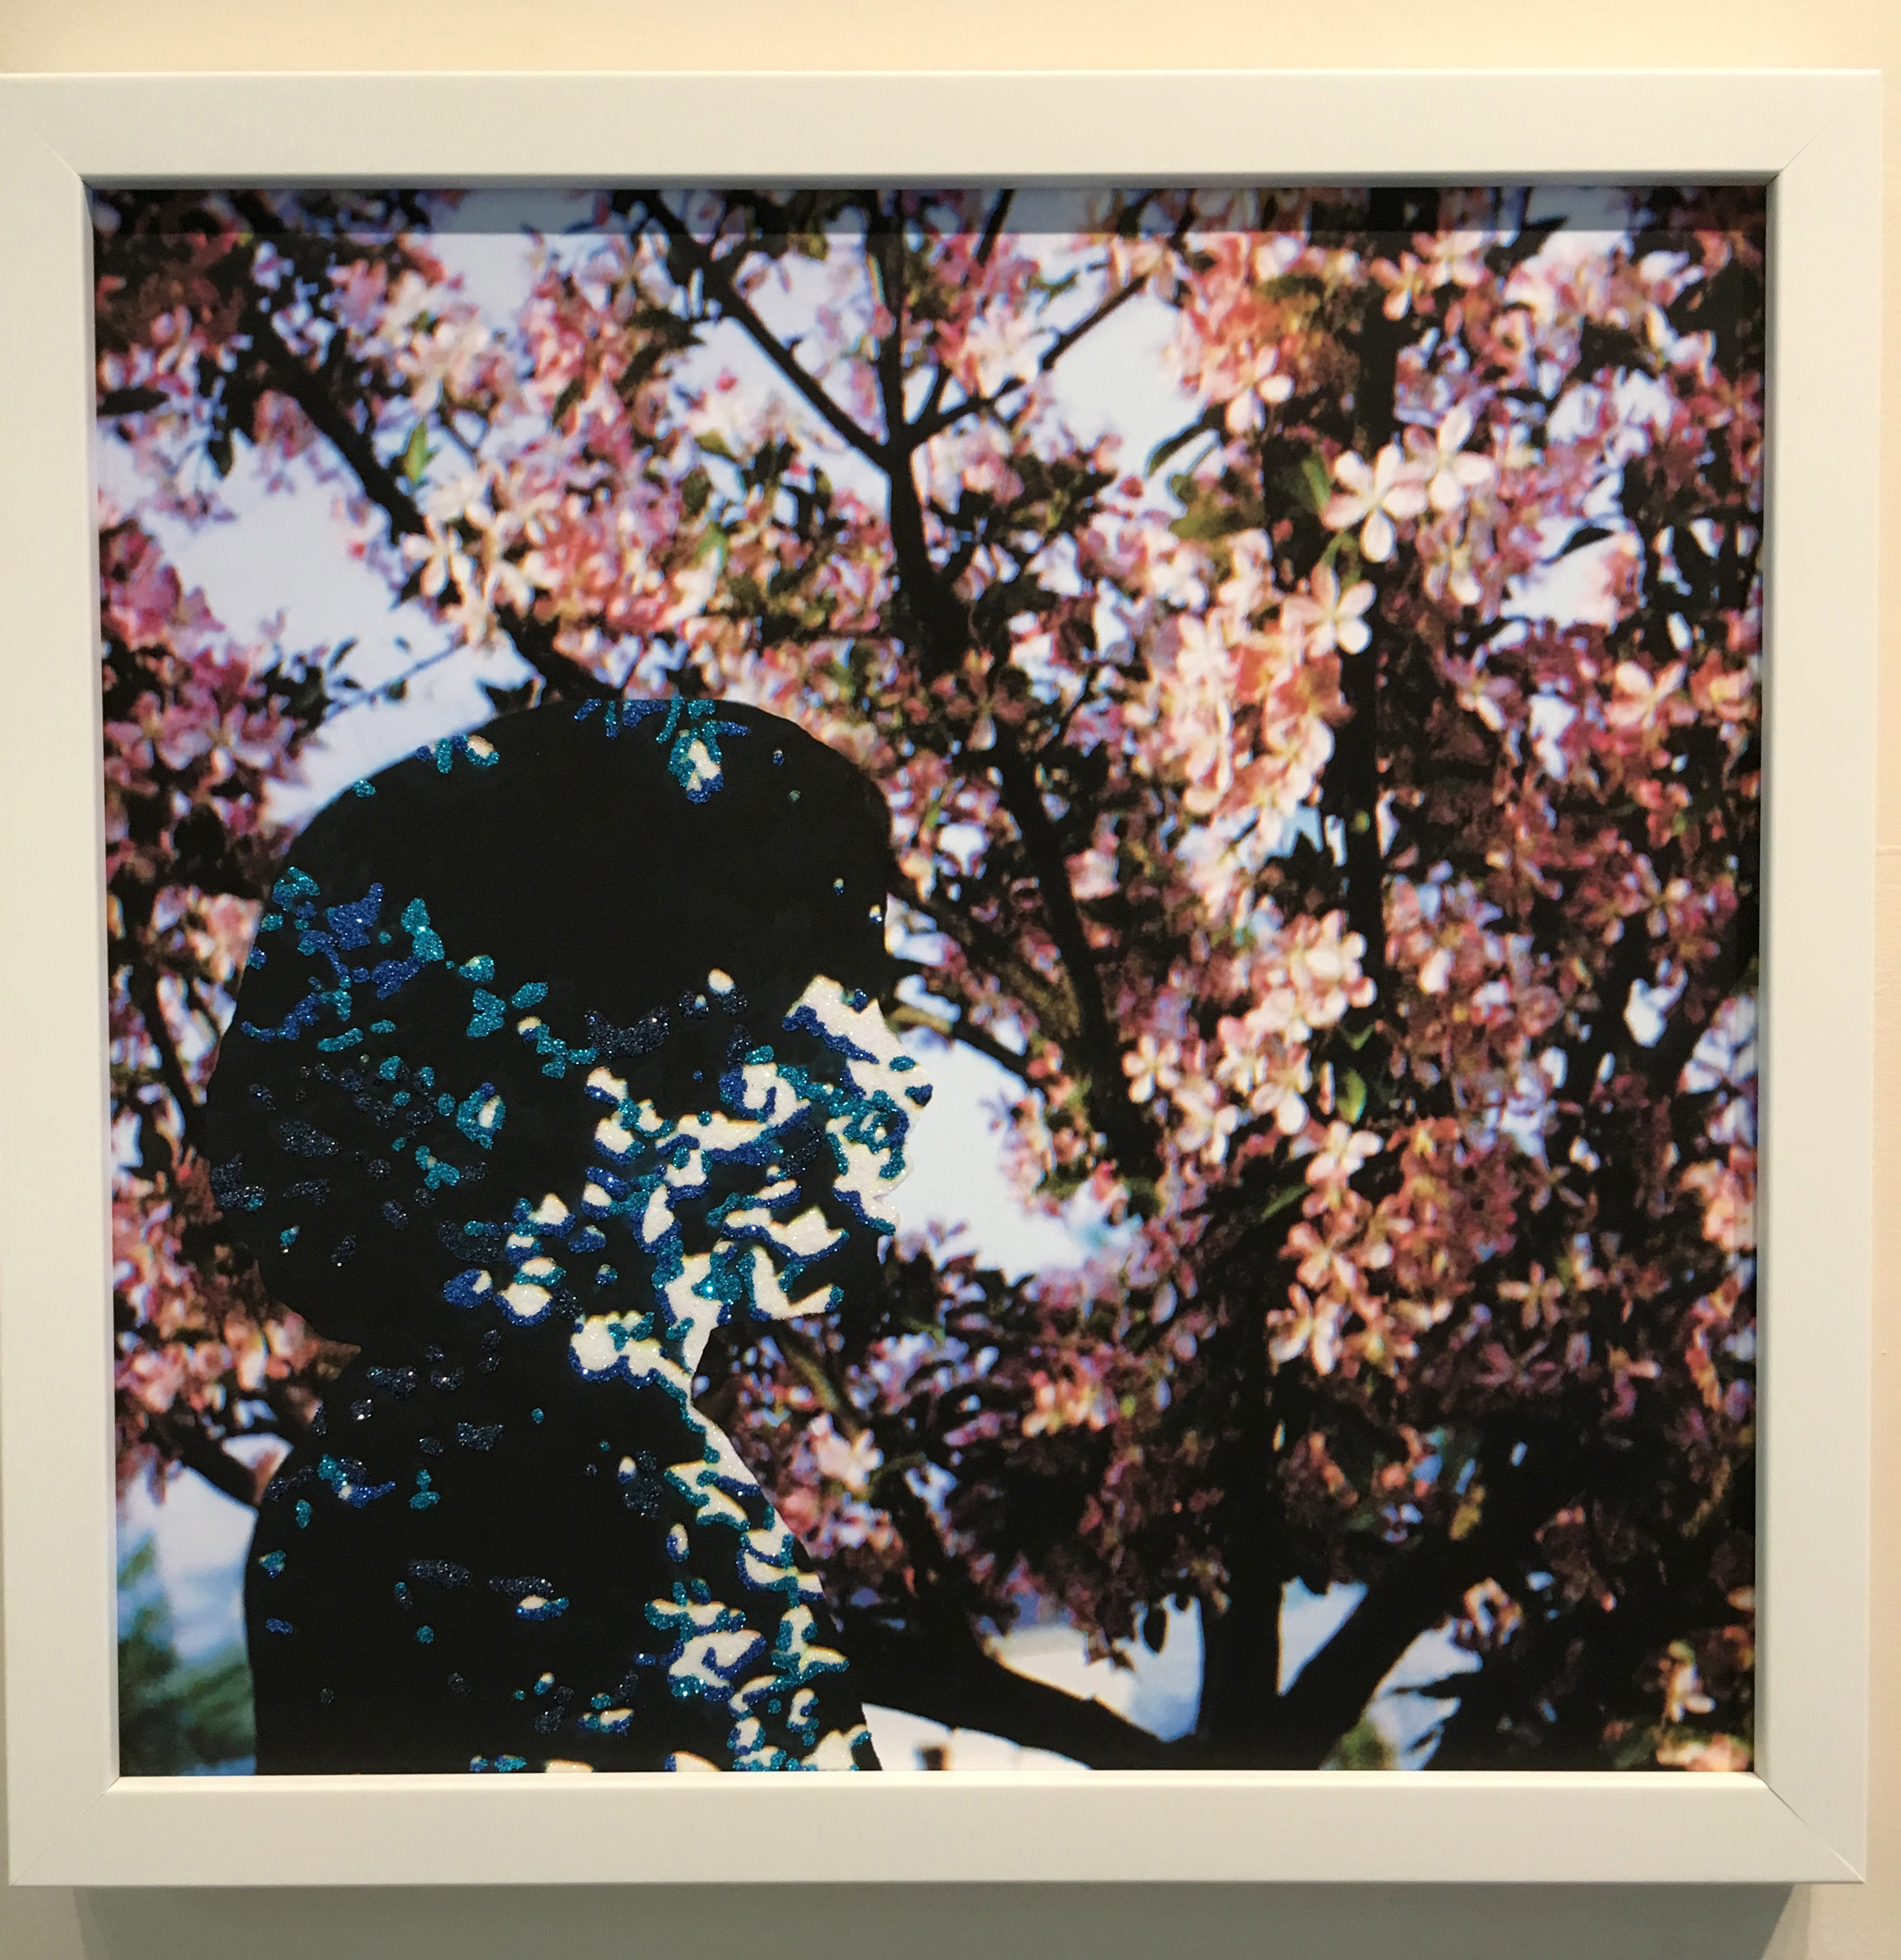 Kelly Hider, Andrea's View, enlarged found photograph, Photoshop, glitter flocking, 2018, each panel: 12" x 12"